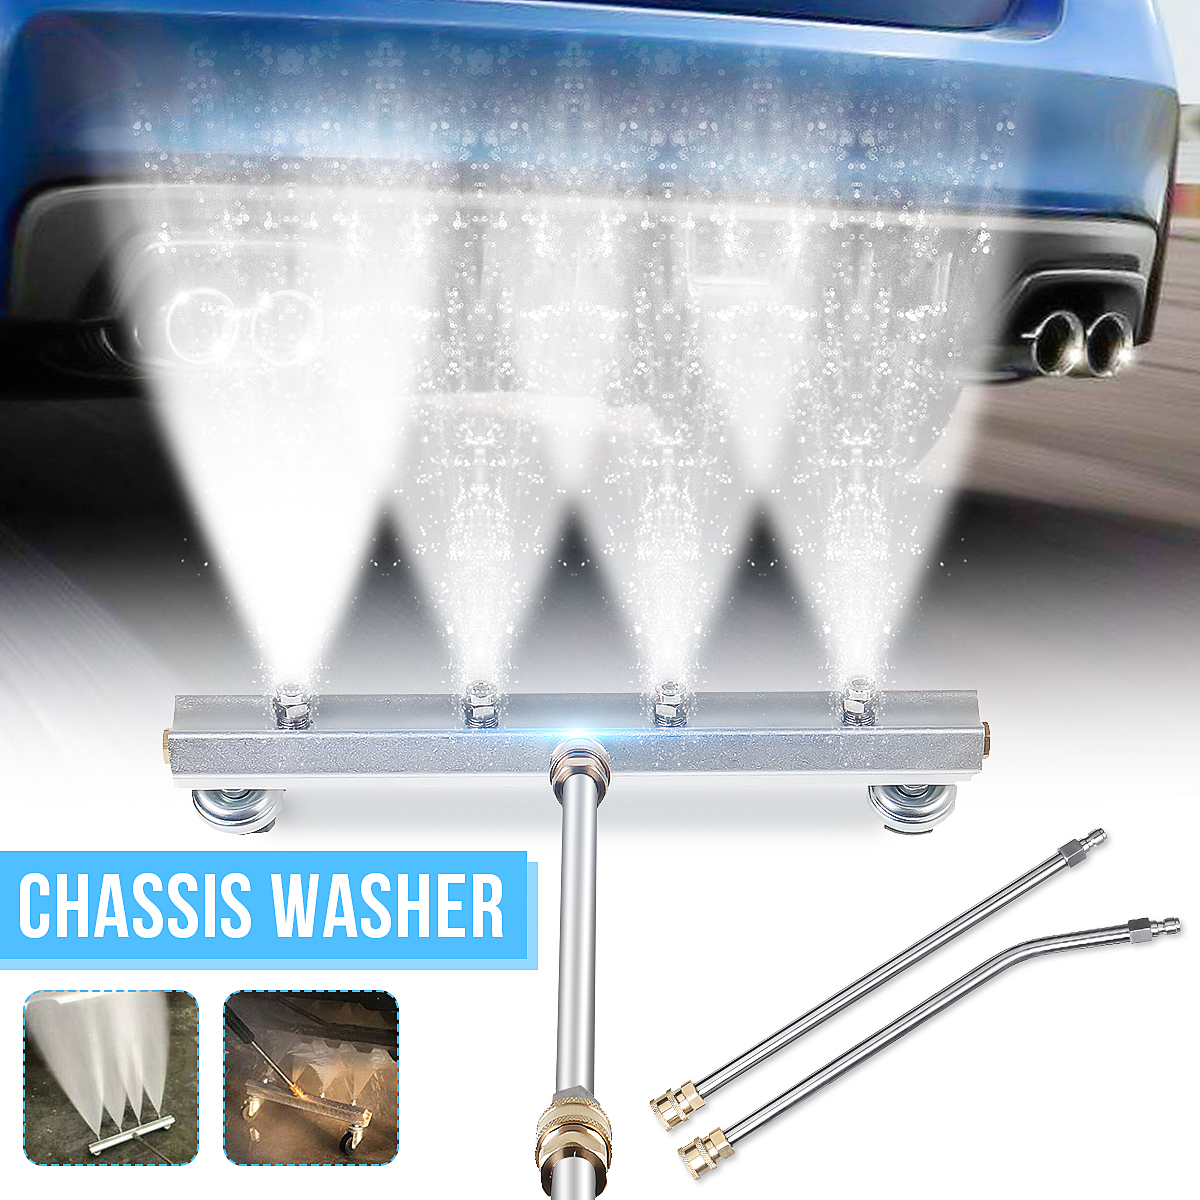 Car Chassis Washer ( 4 Spray Nozzle )